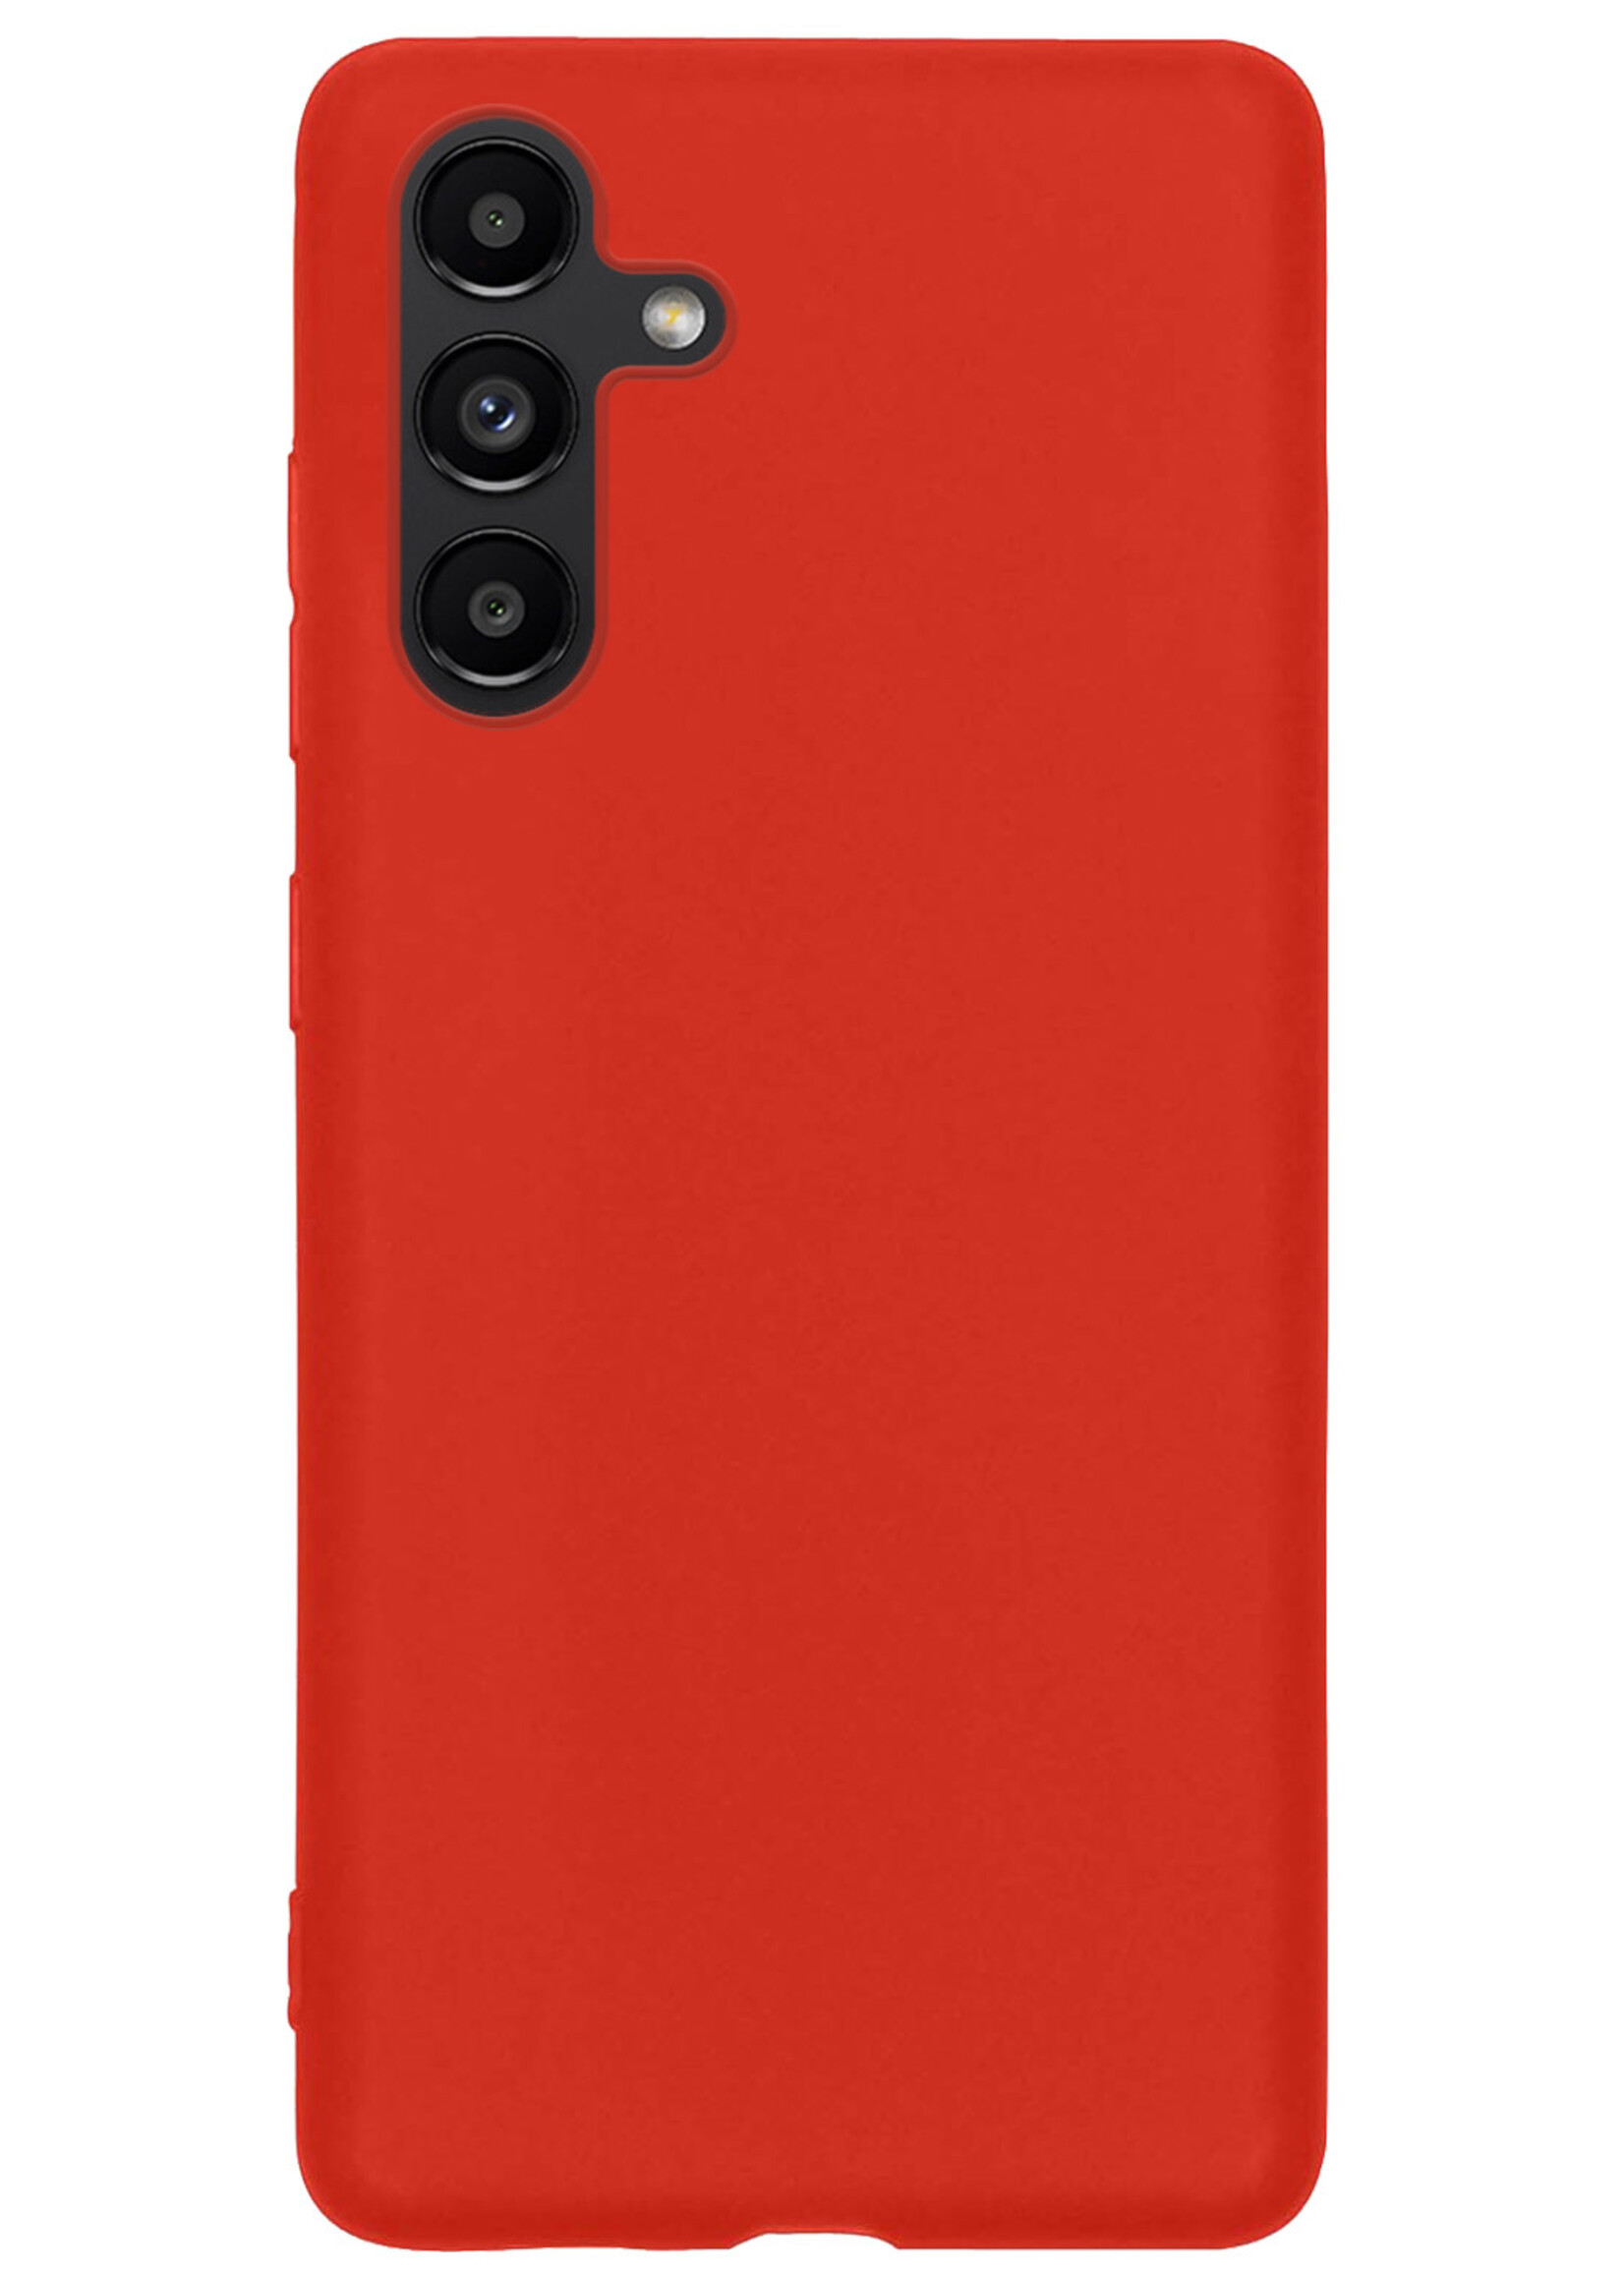 BTH Hoesje Geschikt voor Samsung A04s Hoesje Siliconen Case Hoes - Hoes Geschikt voor Samsung Galaxy A04s Hoes Cover Case - Rood - 2 PACK